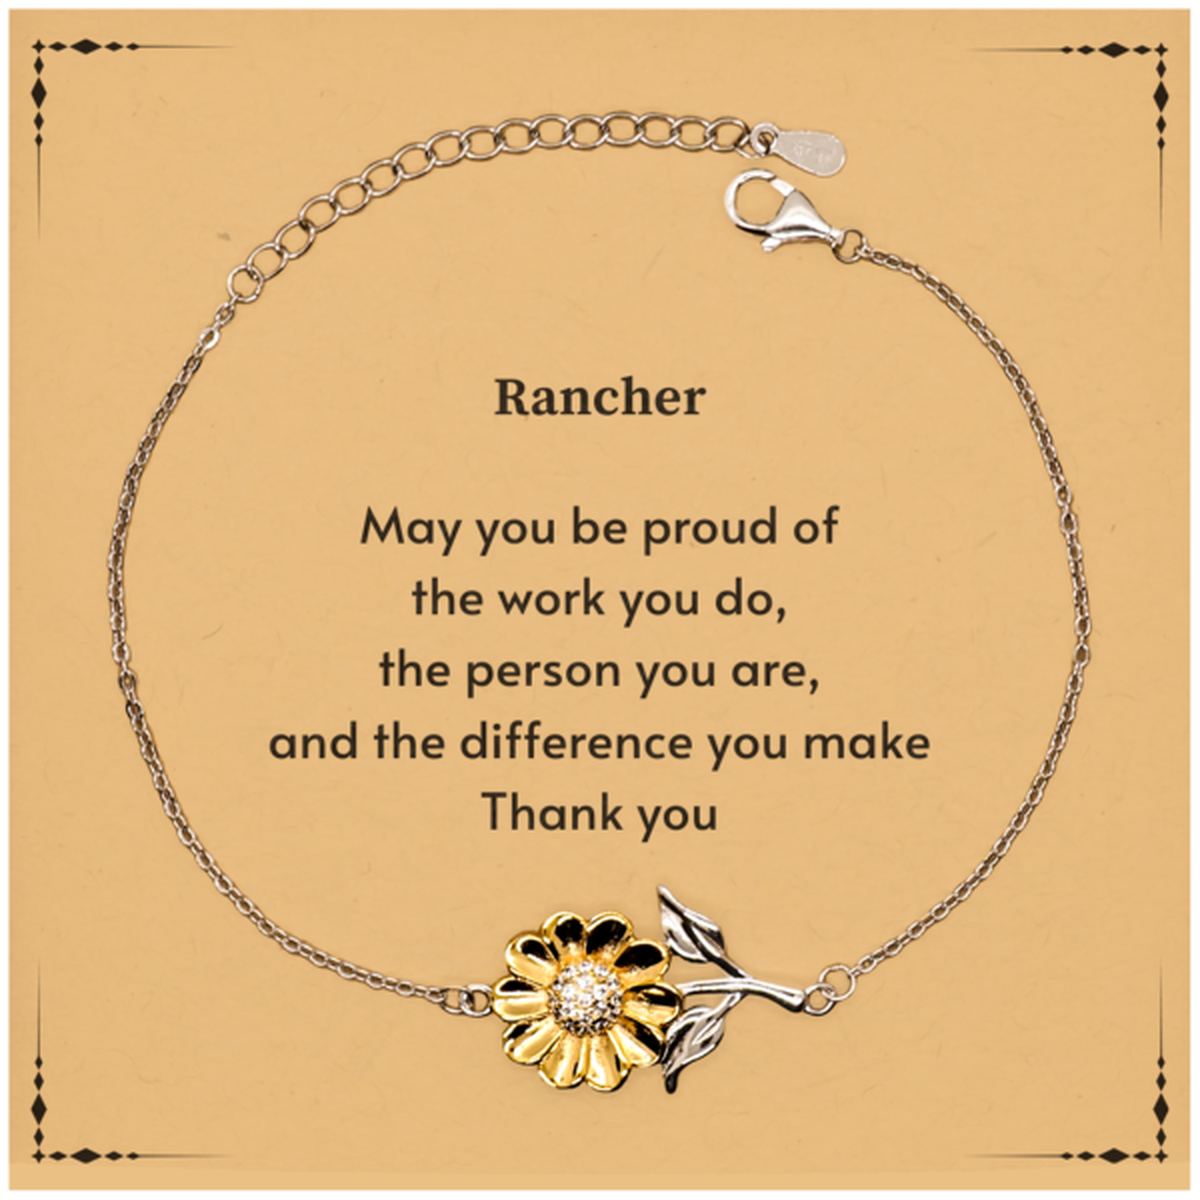 Heartwarming Sunflower Bracelet Retirement Coworkers Gifts for Rancher, Rancher May You be proud of the work you do, the person you are Gifts for Boss Men Women Friends